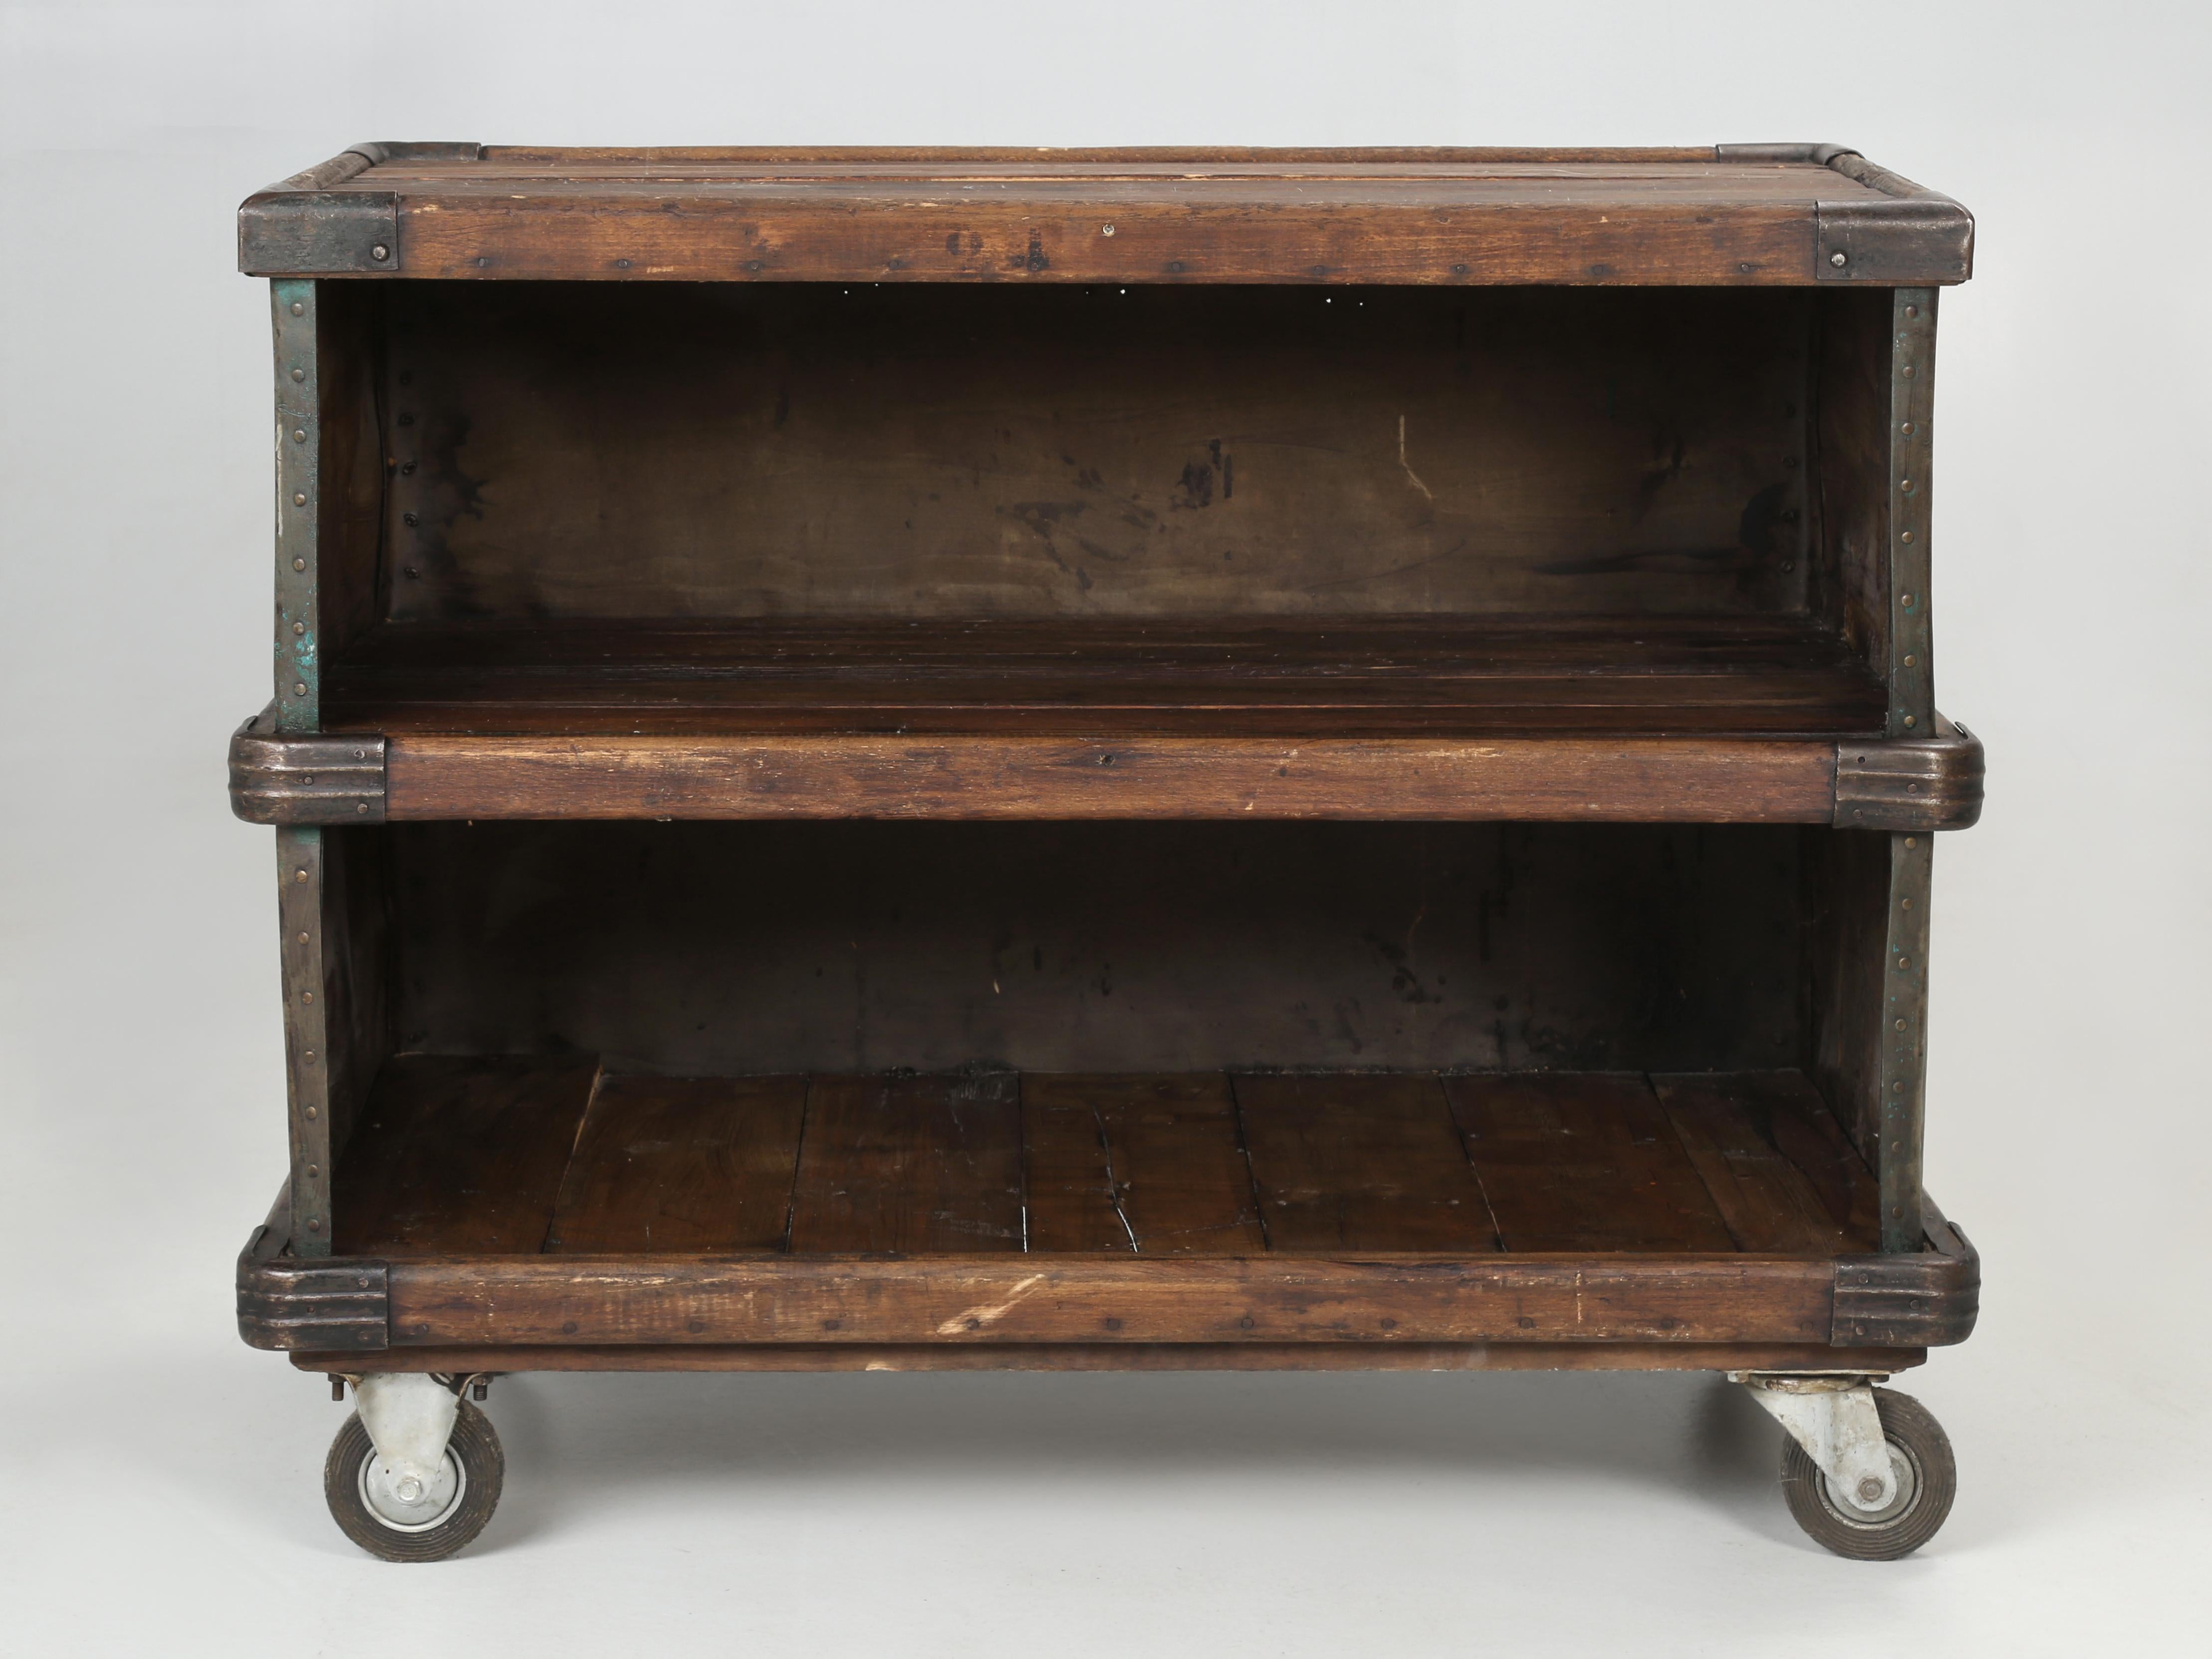 This is Old Plank's idea of a repurposed original French Suroy Industrial mobile storage unit, converted into a more practical Bar Cart. By 1853 the industrial textile revolution arrived in Loos, France with the creation of the Esquermes factory. We